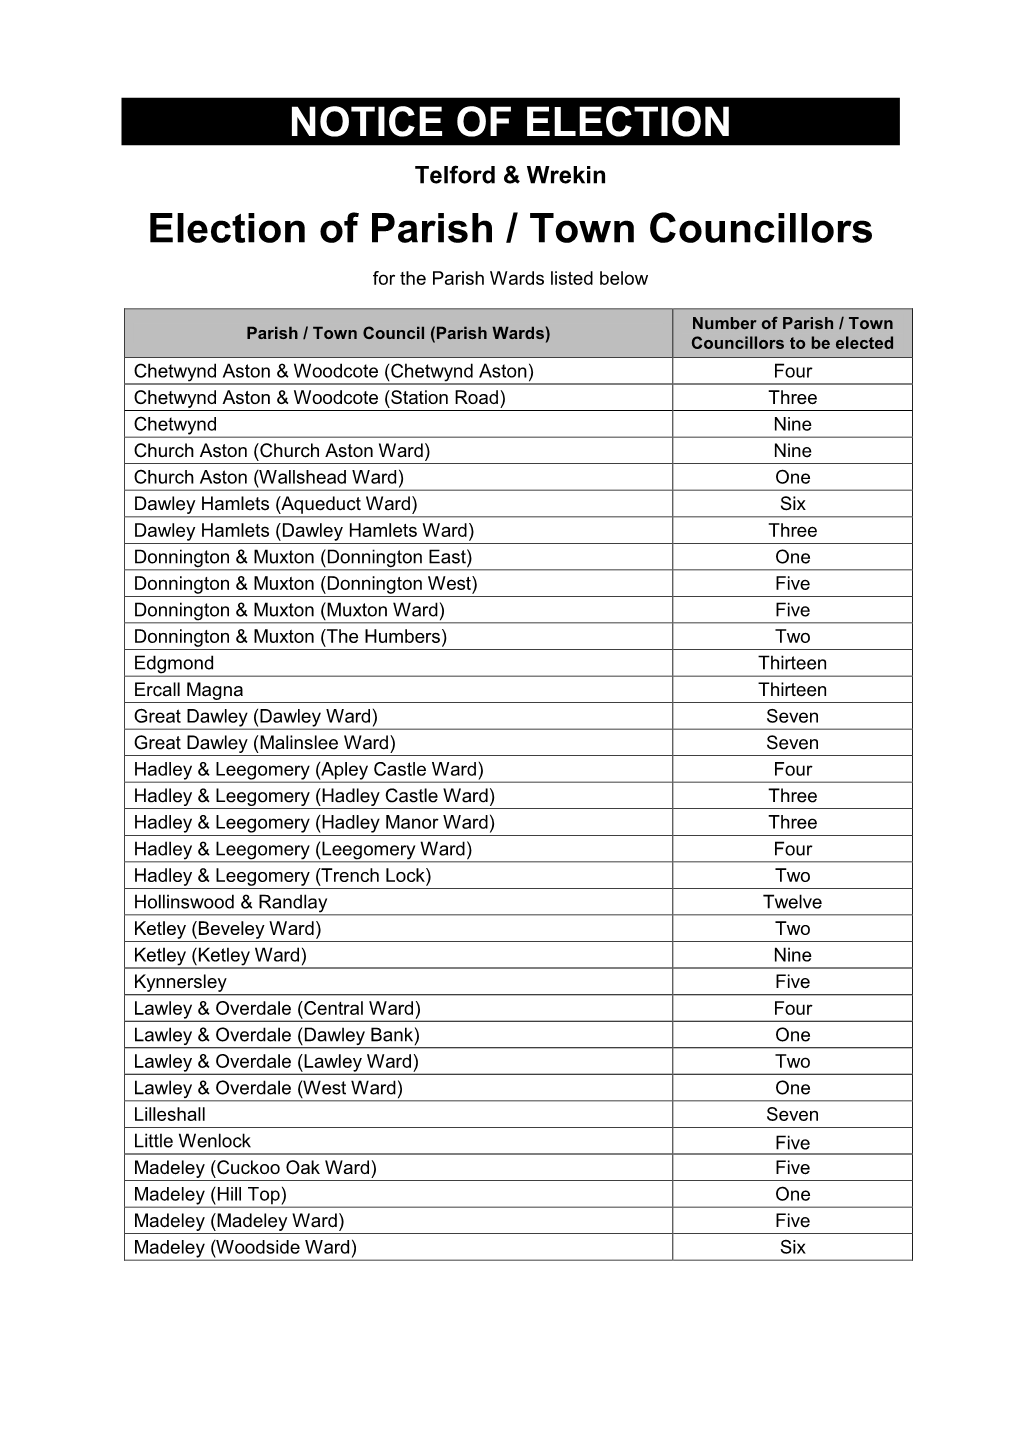 NOTICE of ELECTION Election of Parish / Town Councillors